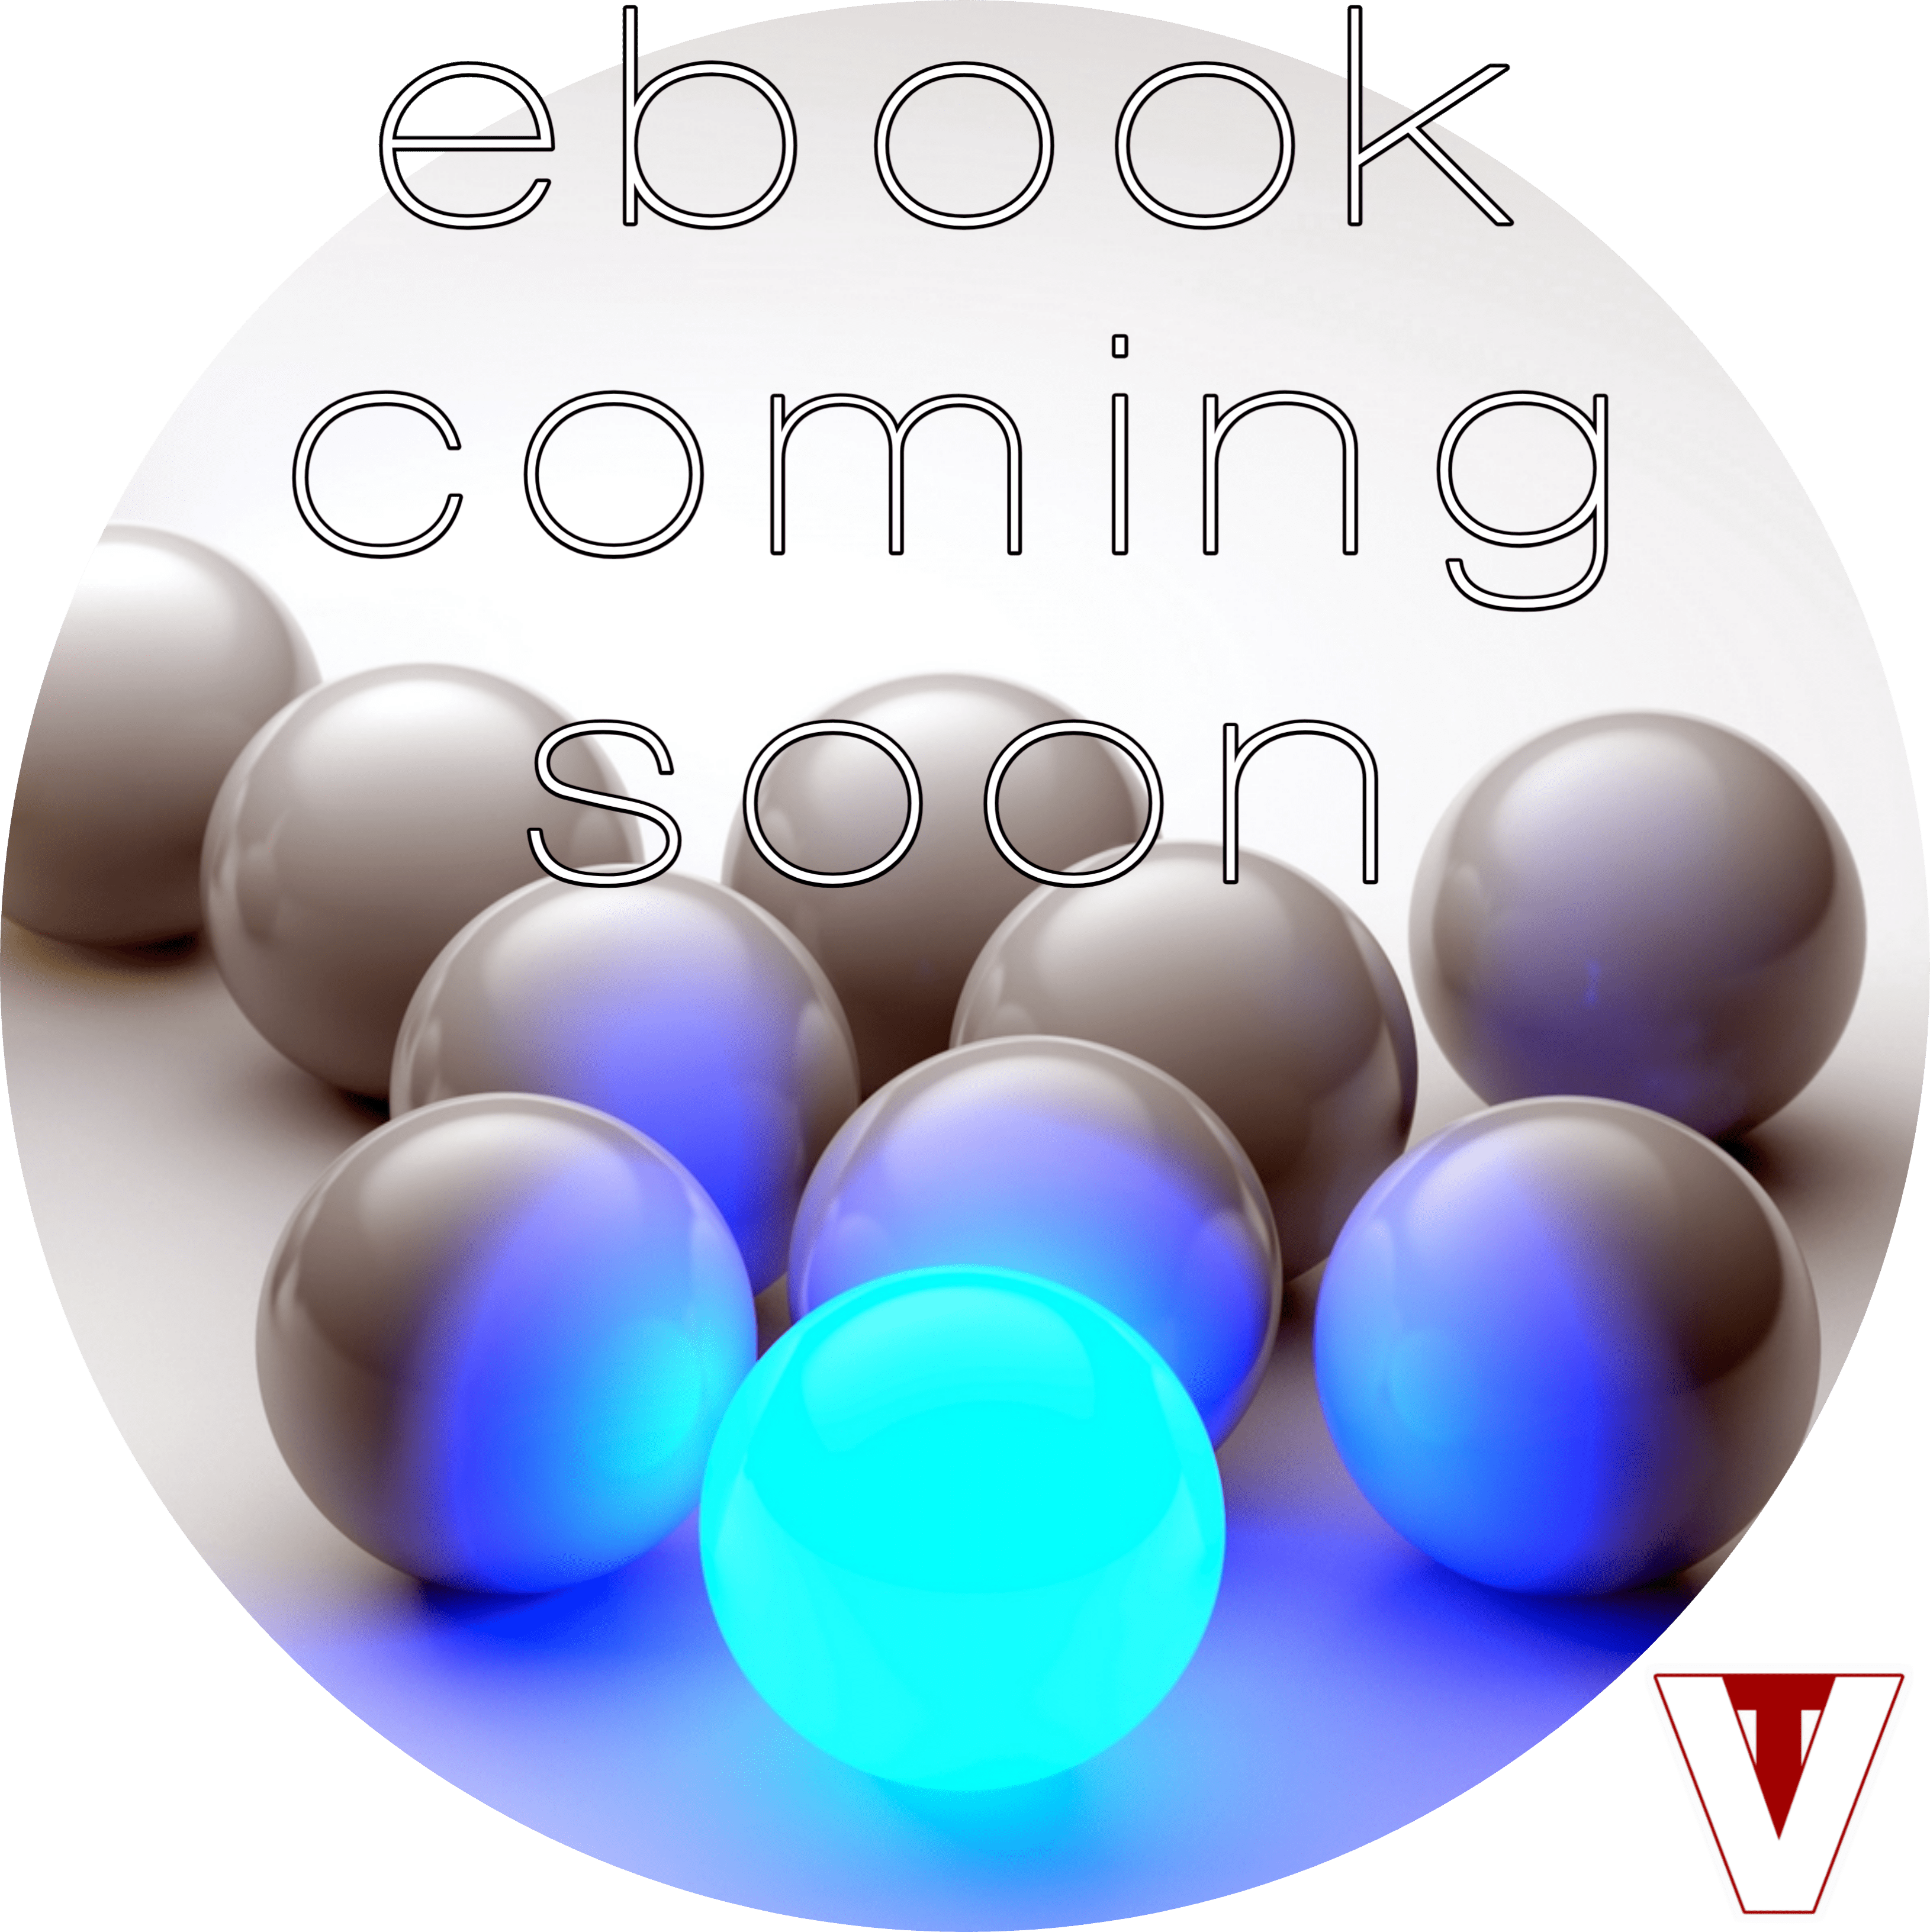 eBook by Vitaly Tennant is coming soon